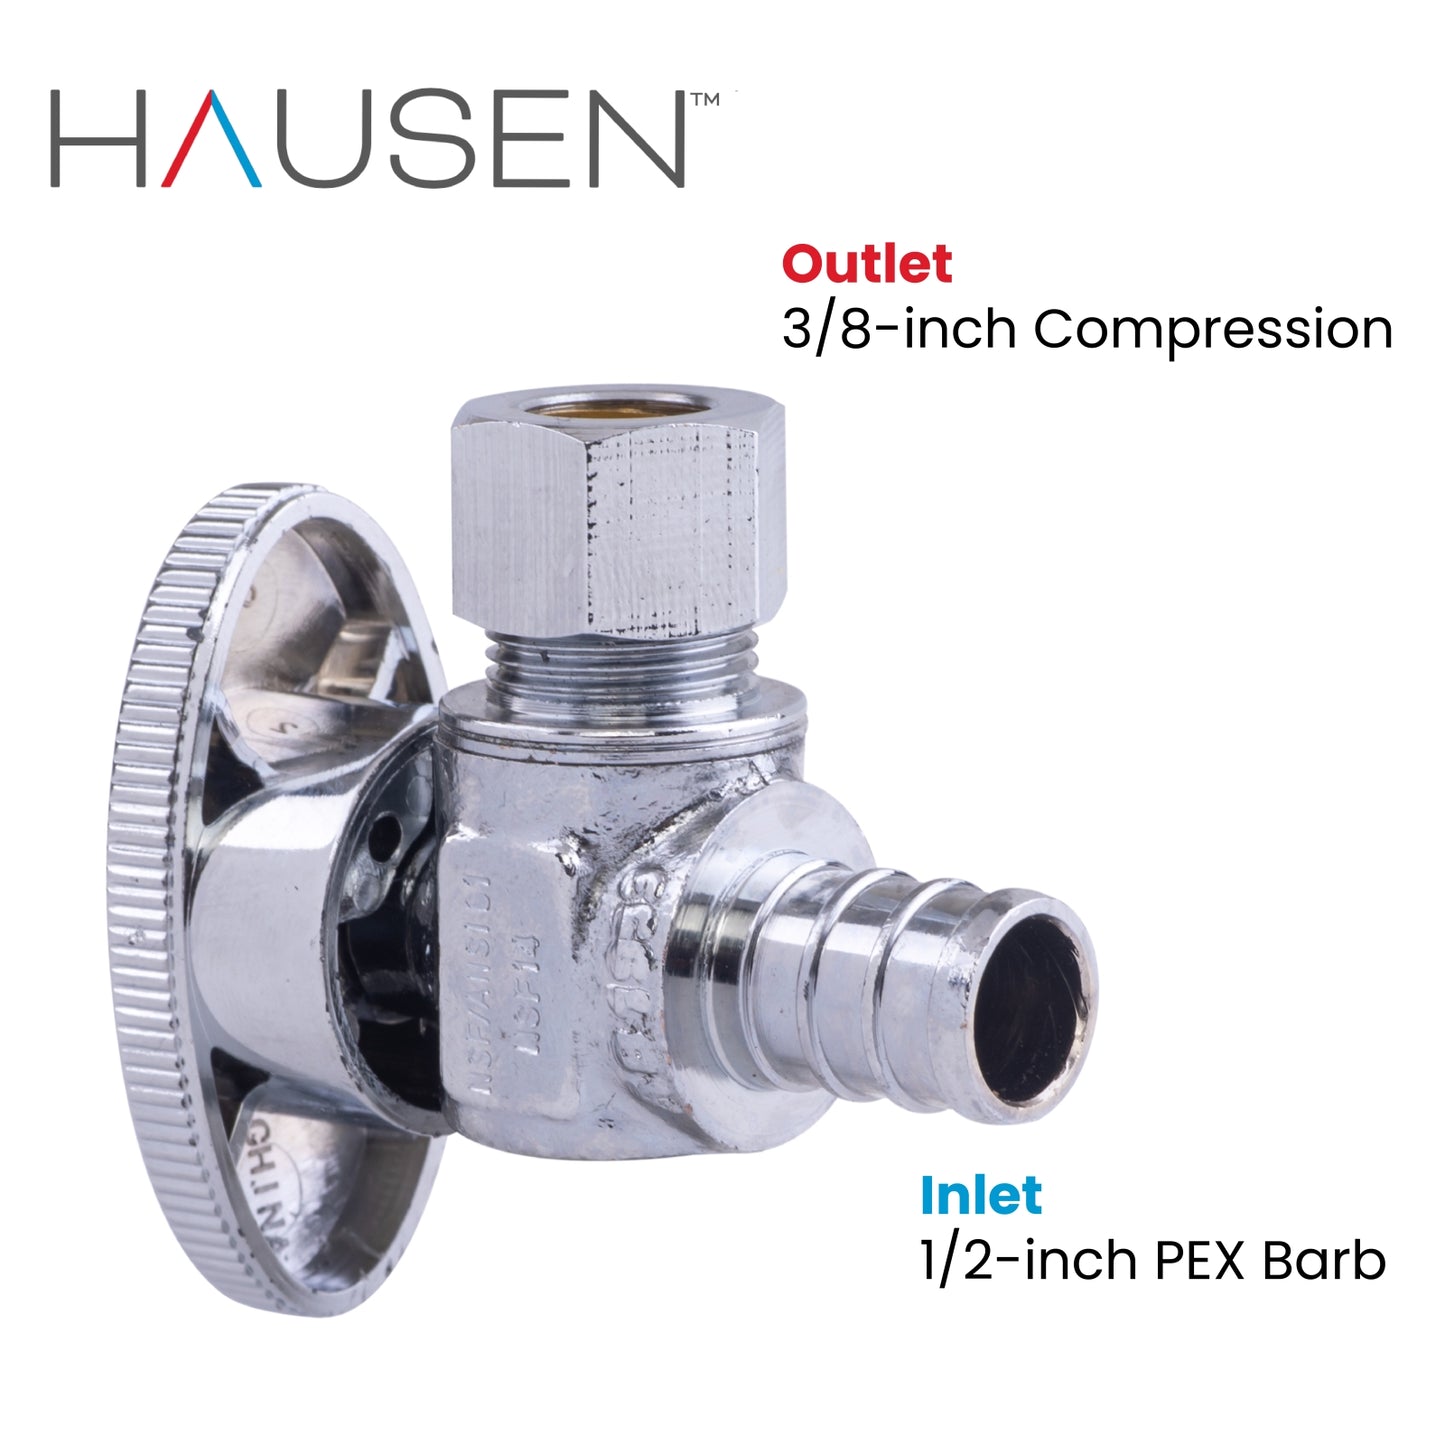 Hausen 1/2-inch PEX Barb x 3/8-inch Compression Outlet 1/4-Turn Angle Water Stop; Lead-Free Forged Brass; Chrome-Plated; cUPC/ANSI/NSF Certified; Compatible with PEX and Copper Piping, 20-Pack